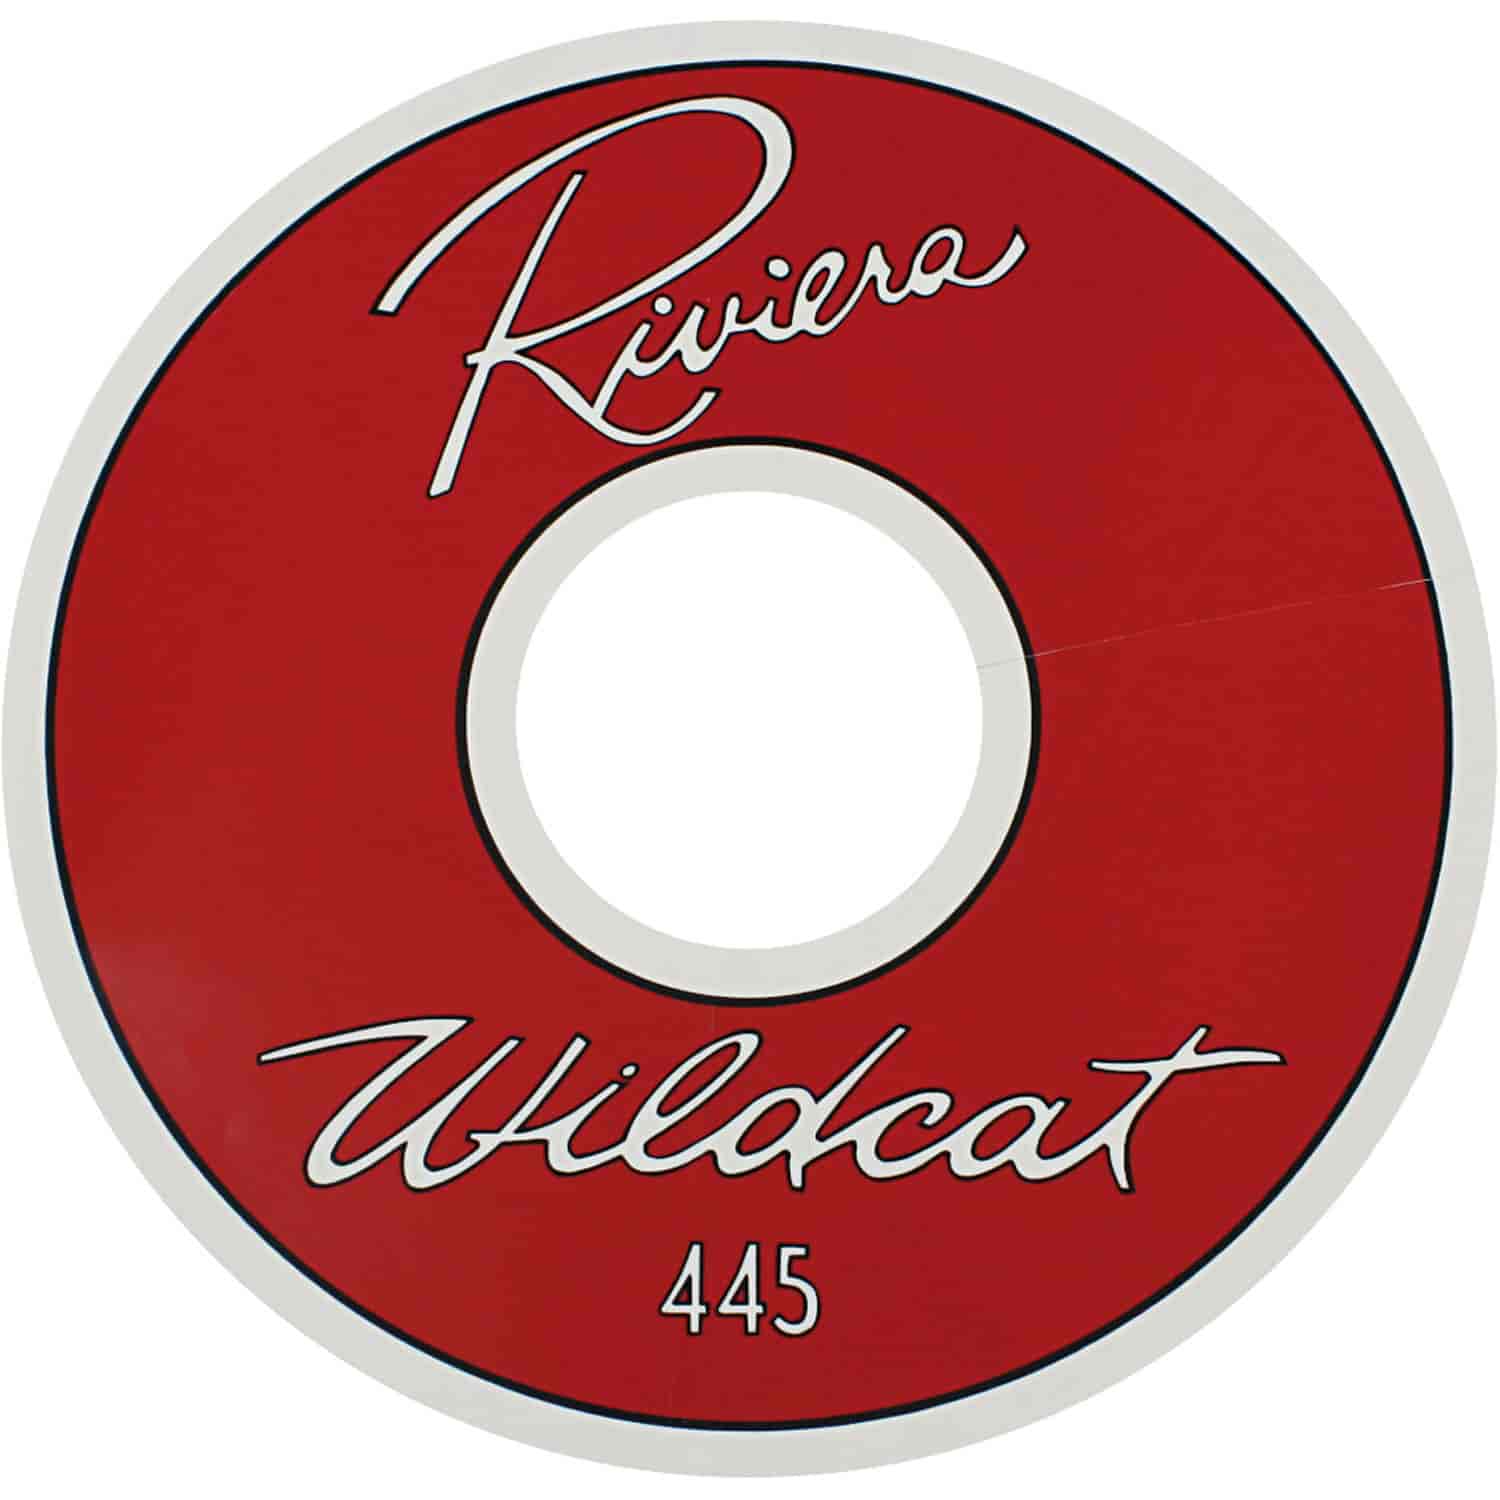 Decal 63 Riviera Air Cleaner Clear 14 Wildcat 445